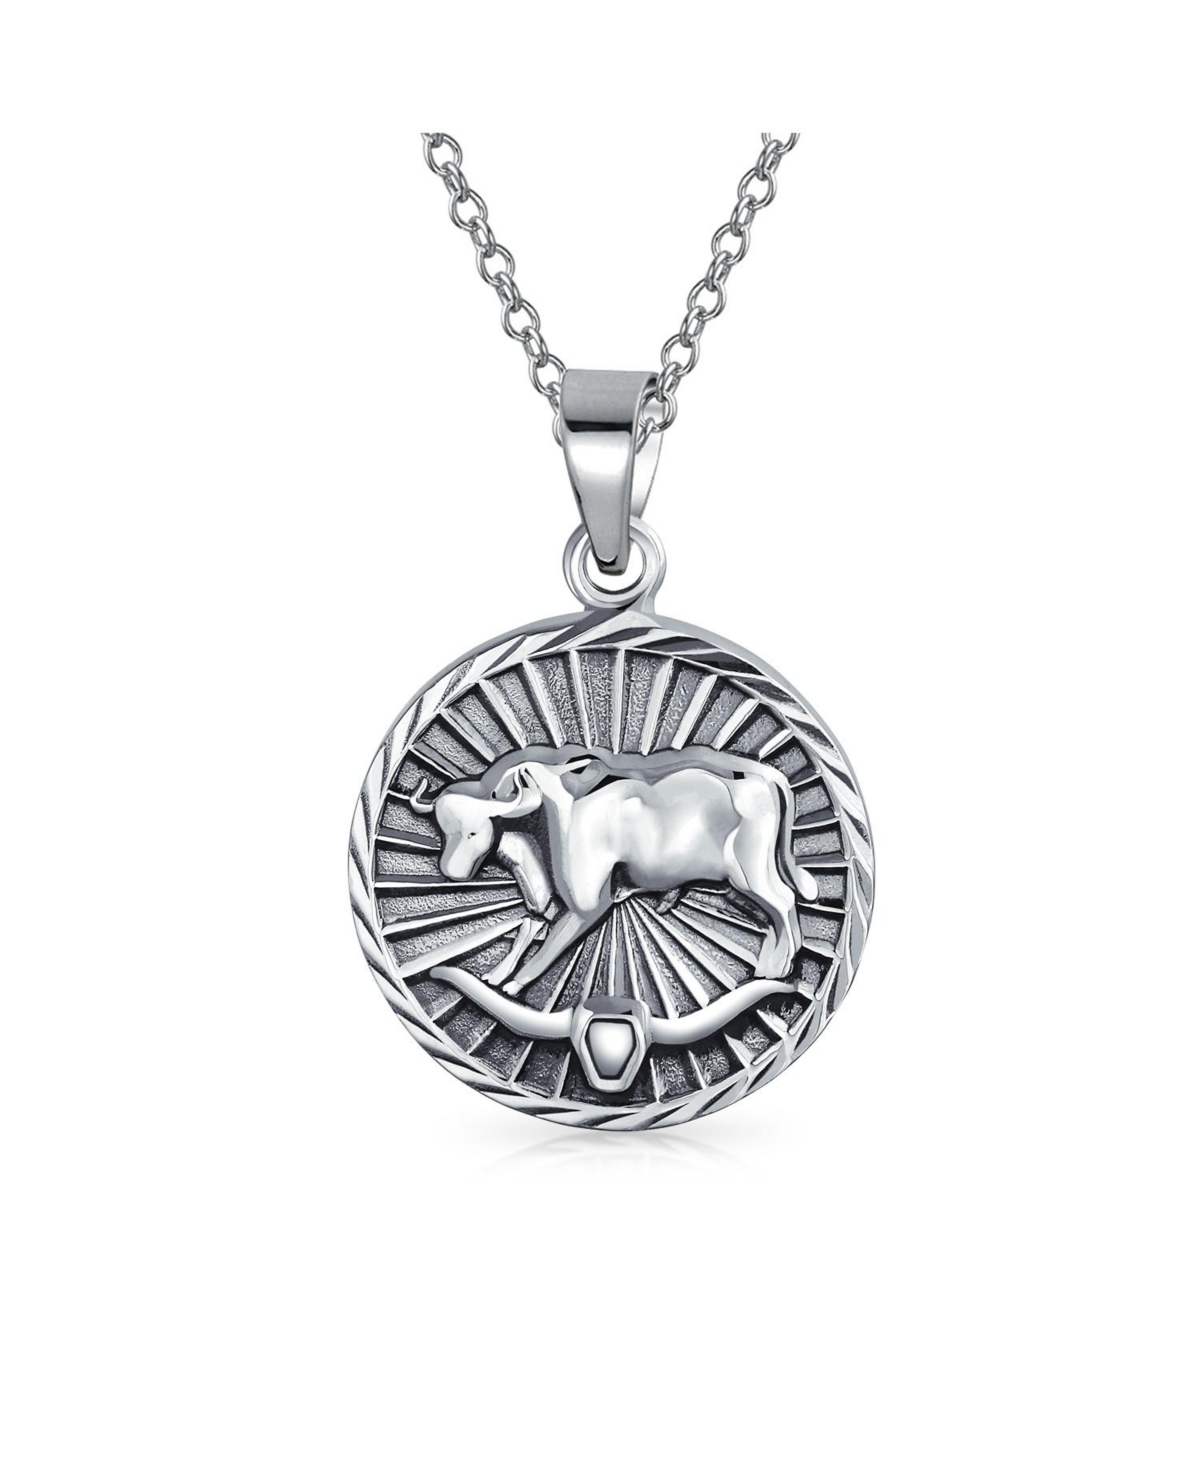 Taurus Zodiac Sign Astrology Horoscope Round Medallion Pendant For Men Women Necklace Antiqued Sterling Silver - Silver